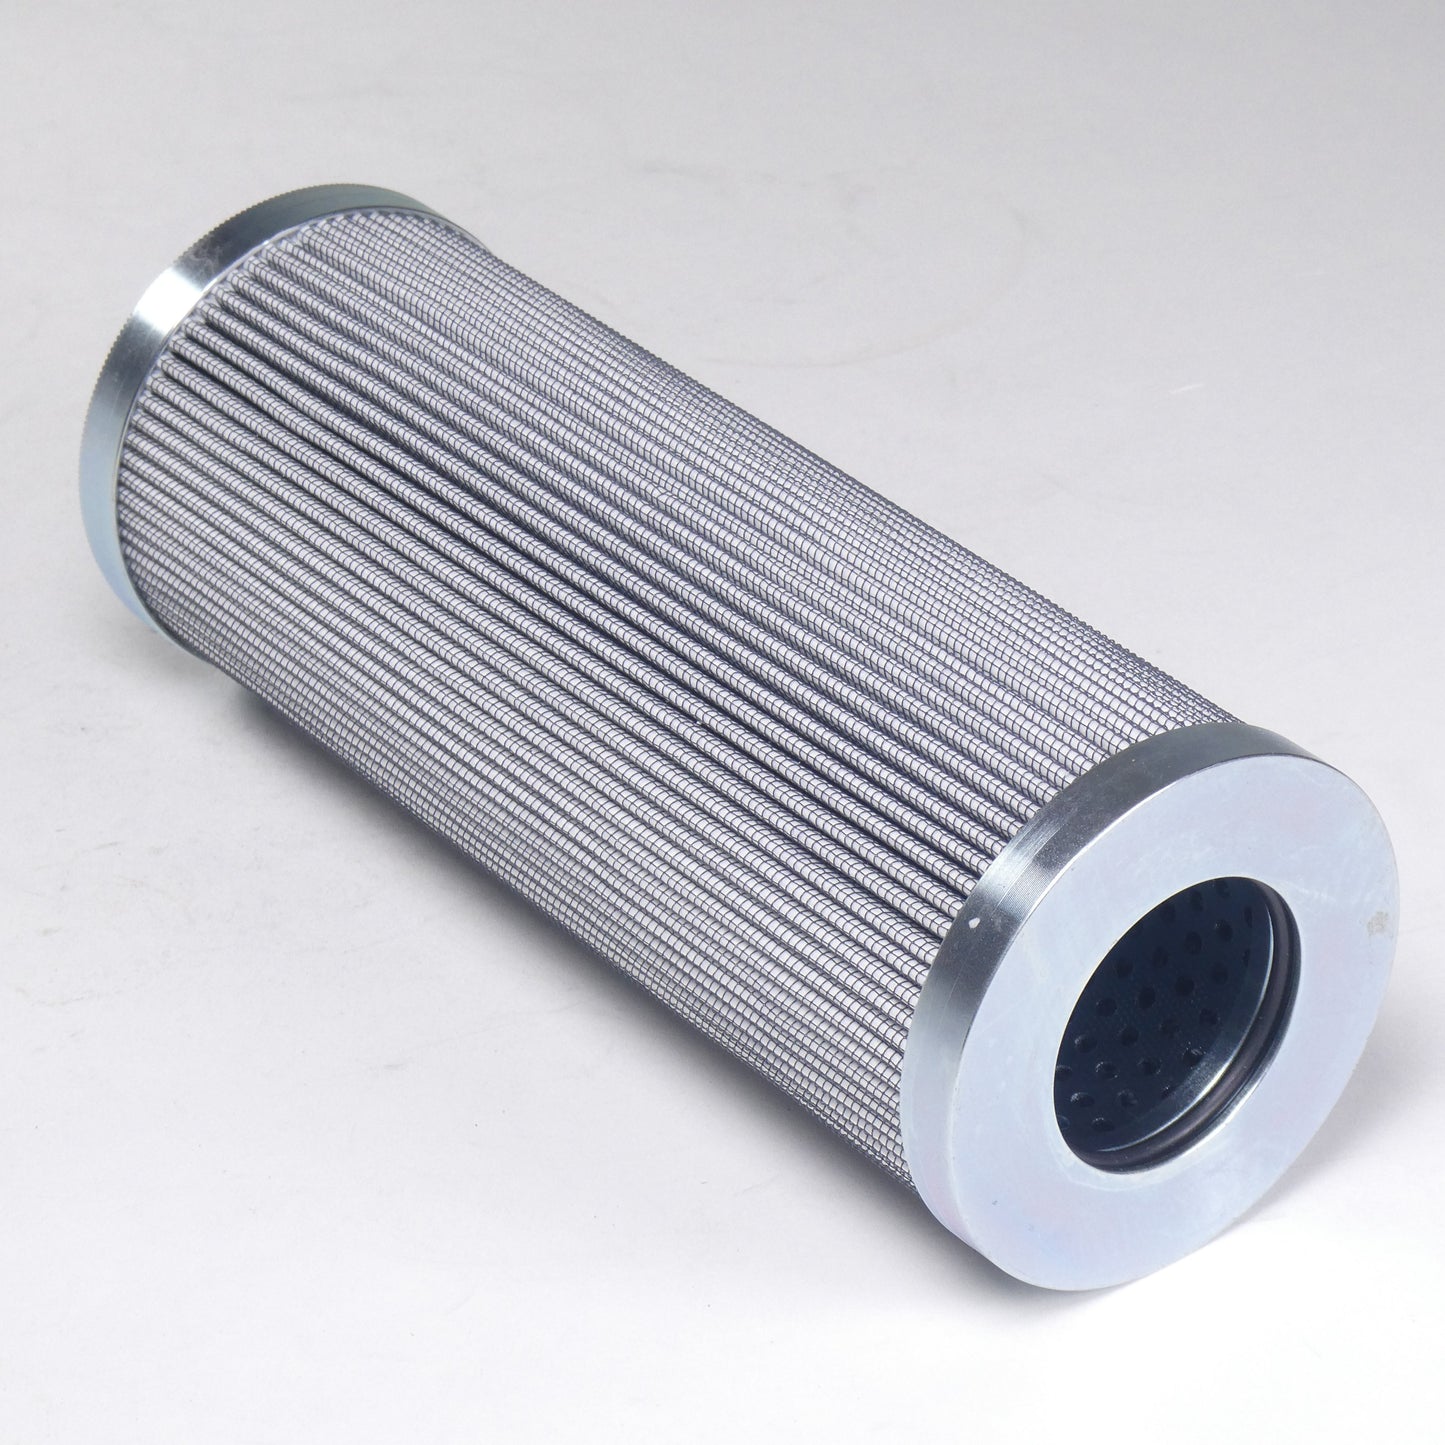 Hydrafil Replacement Filter Element for Finn FFKPVL17006A10ABS